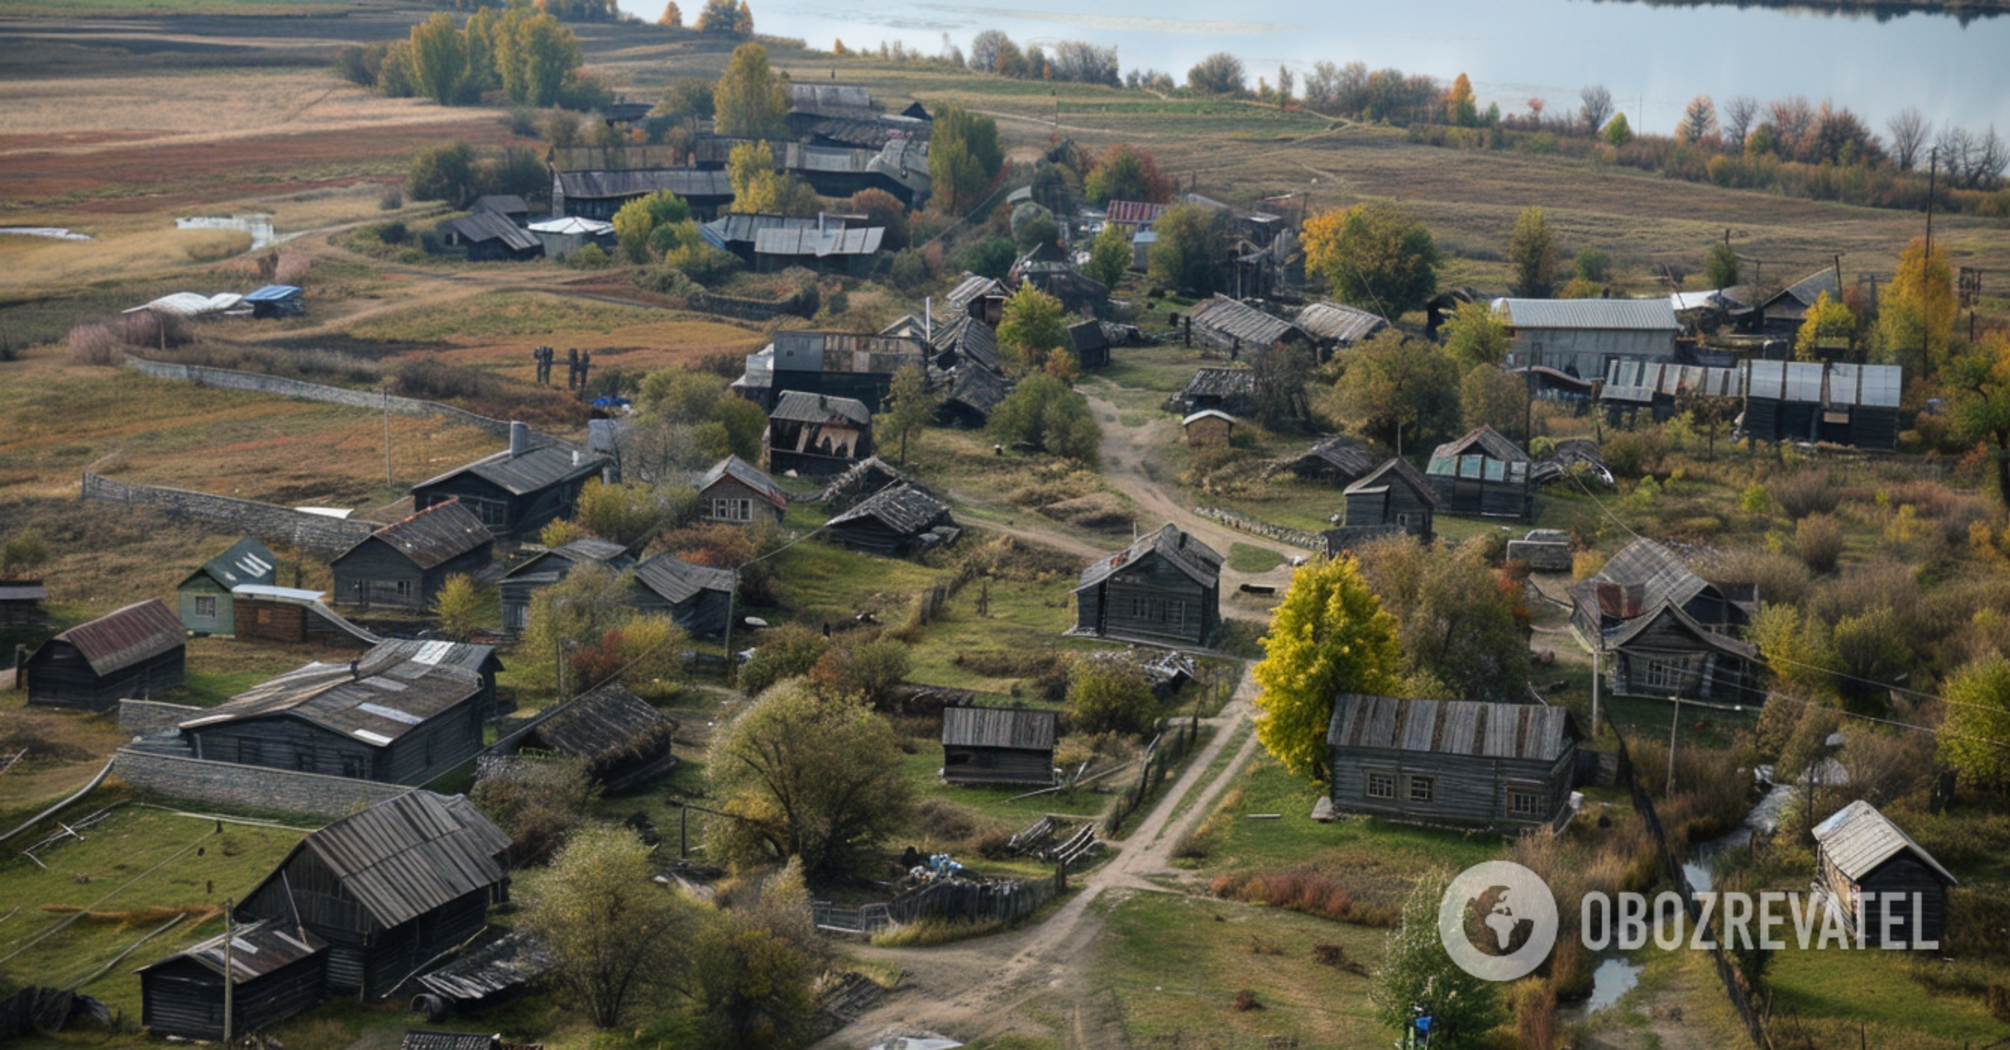 Why 6 acres of land were allocated for summer cottages in the USSR: how it was calculated